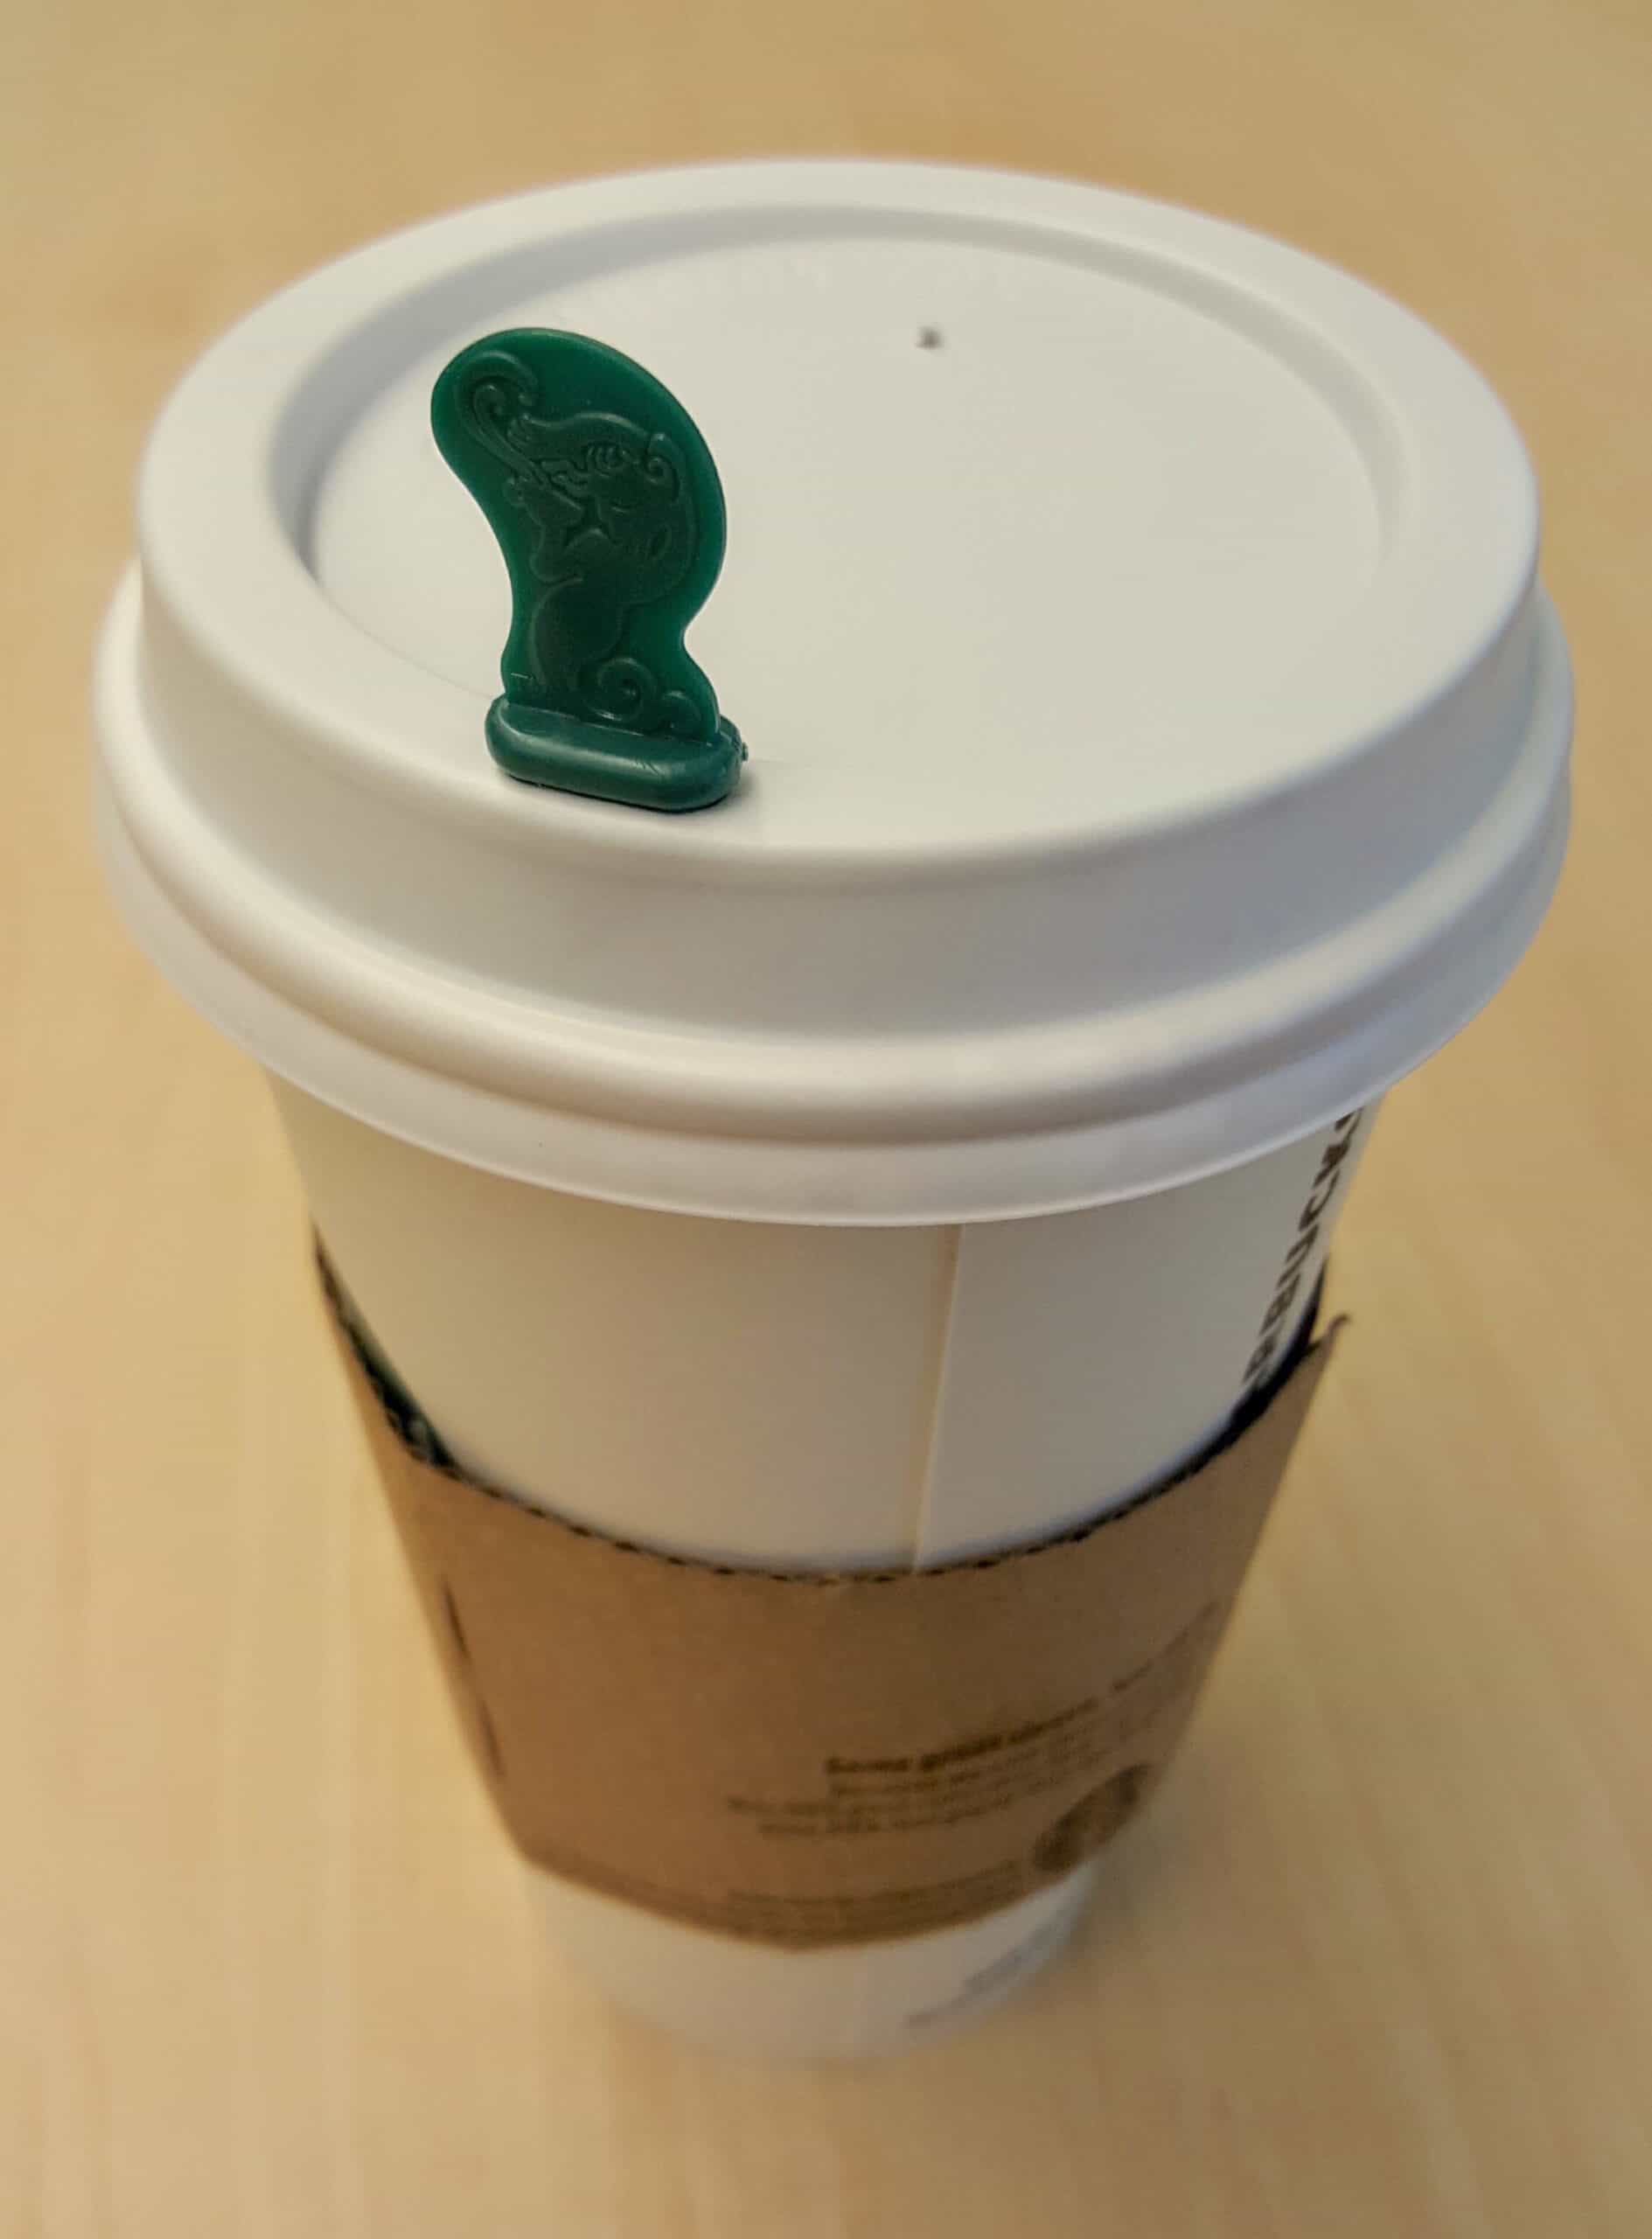 Starbucks cup with lid and stopper